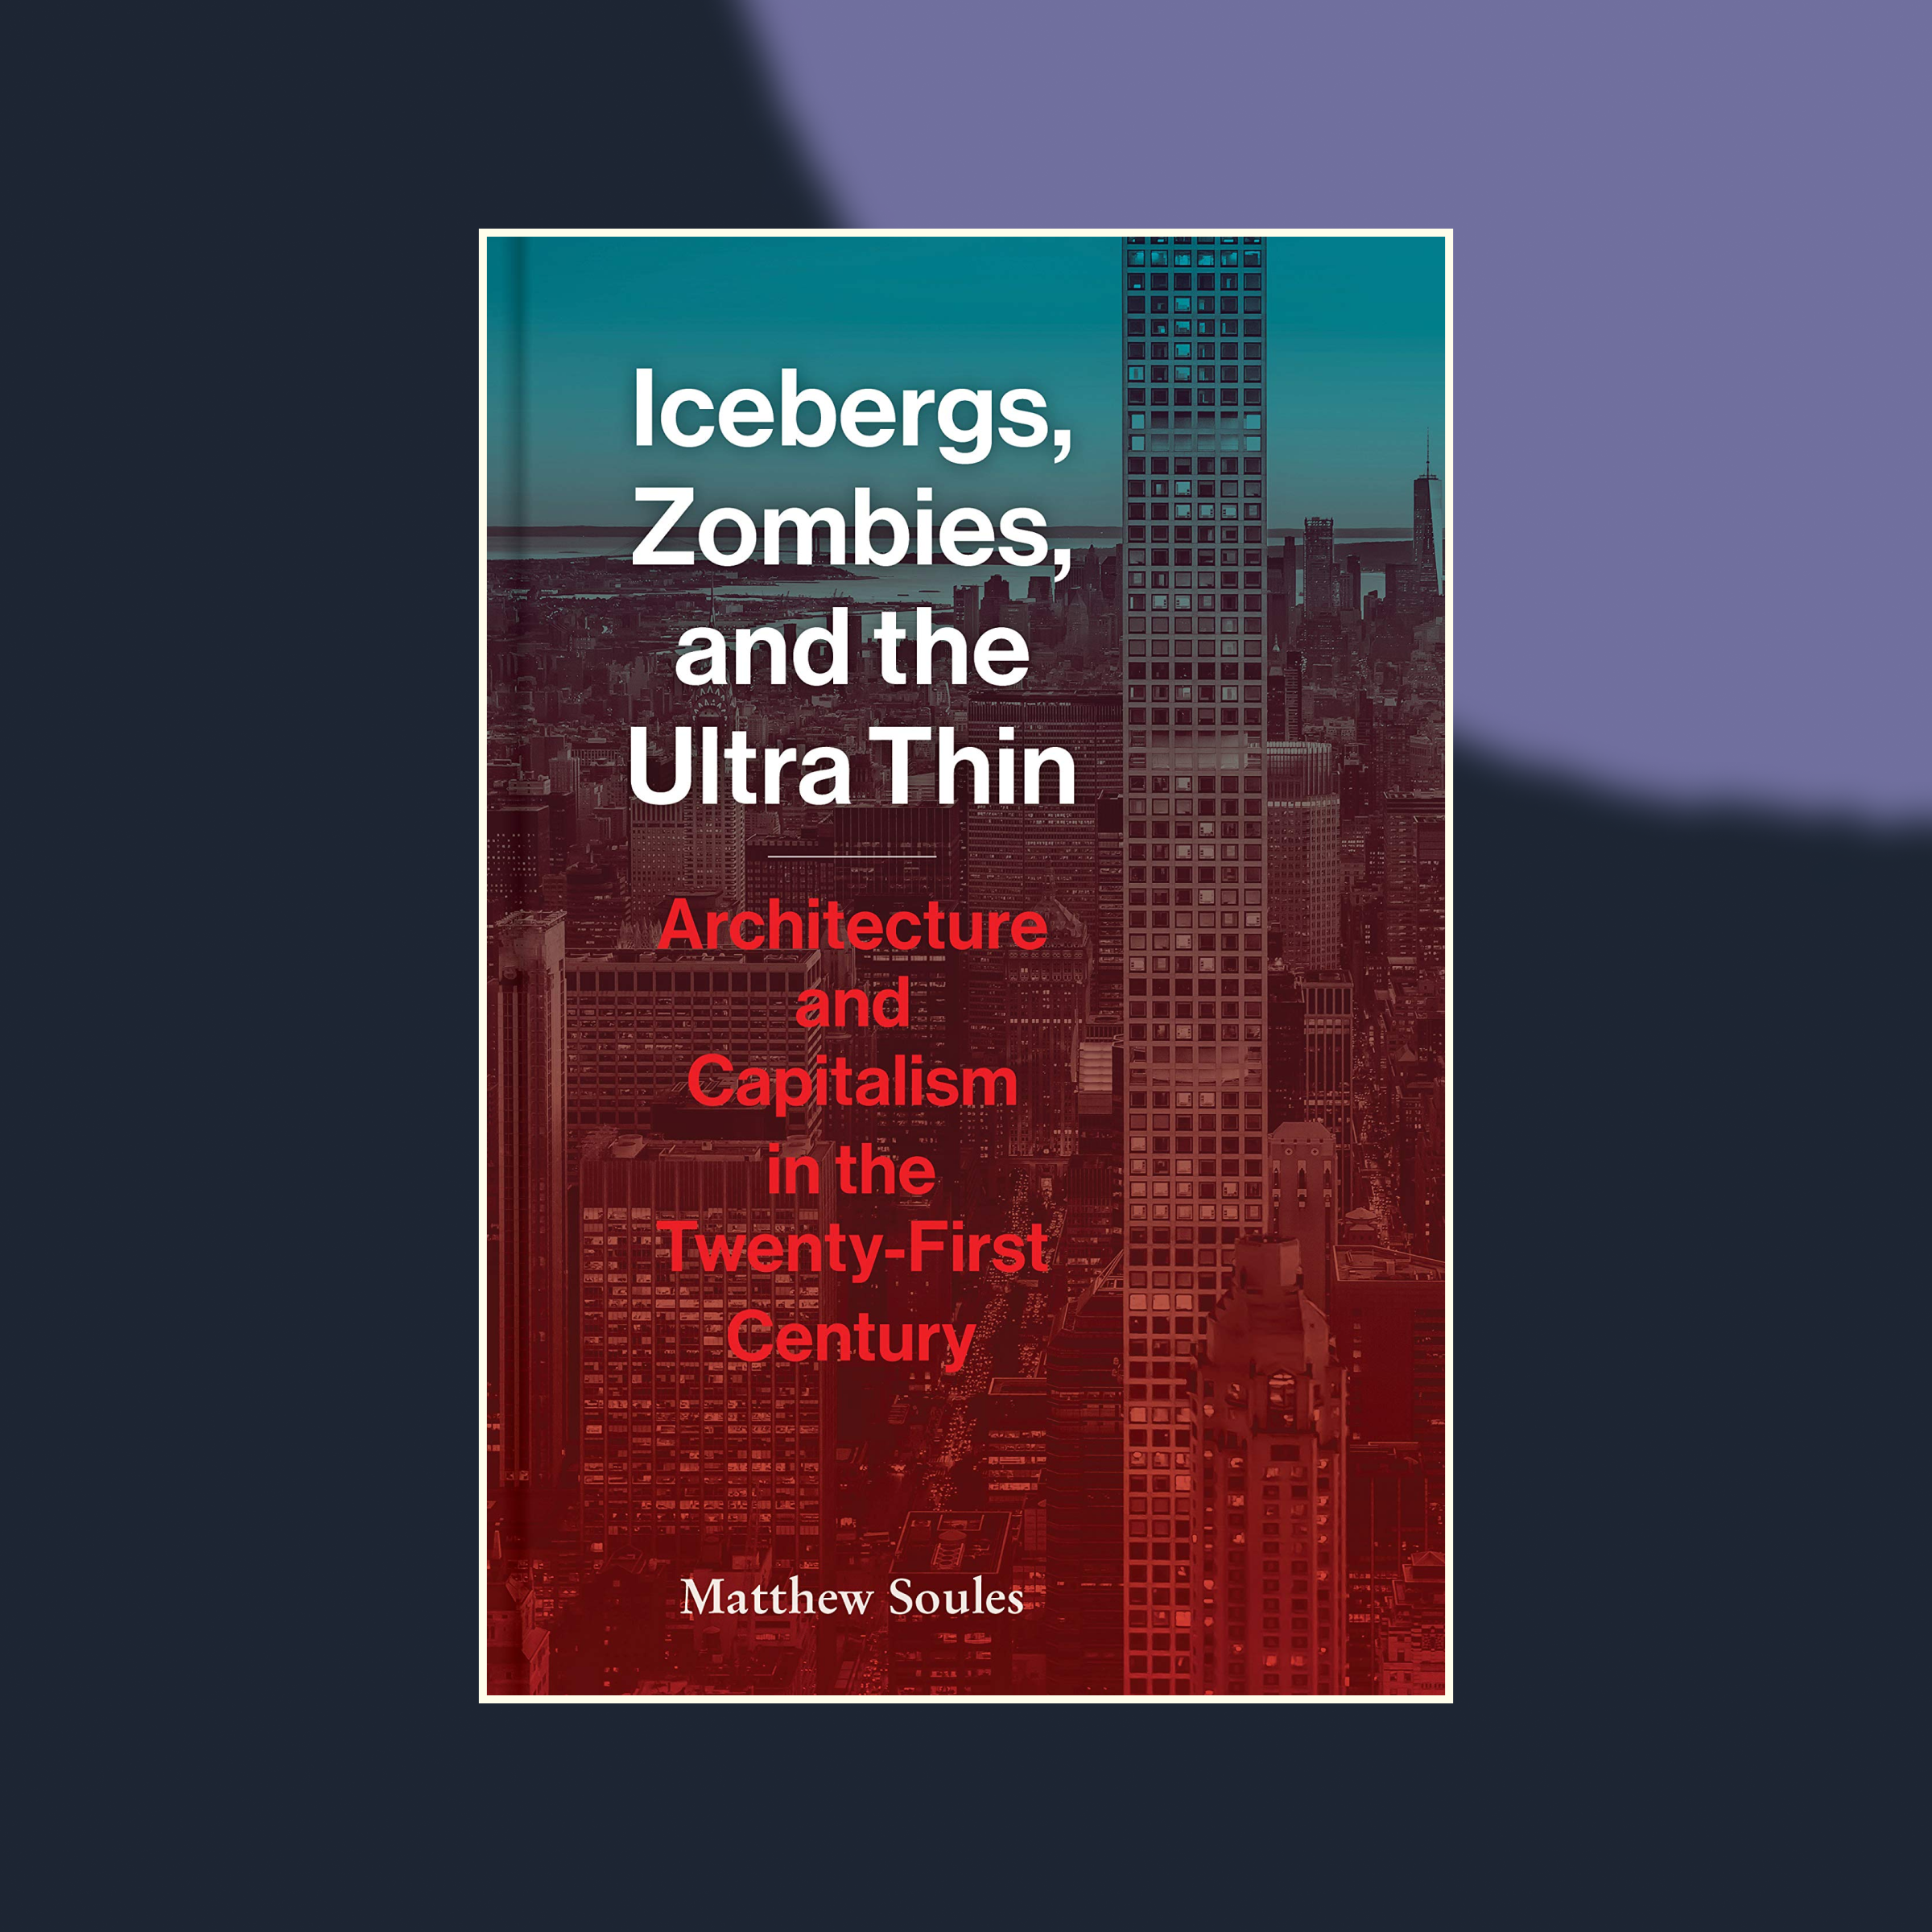 Book cover of Icebergs, Zombies, and the Ultra Thin against an abstract painted background